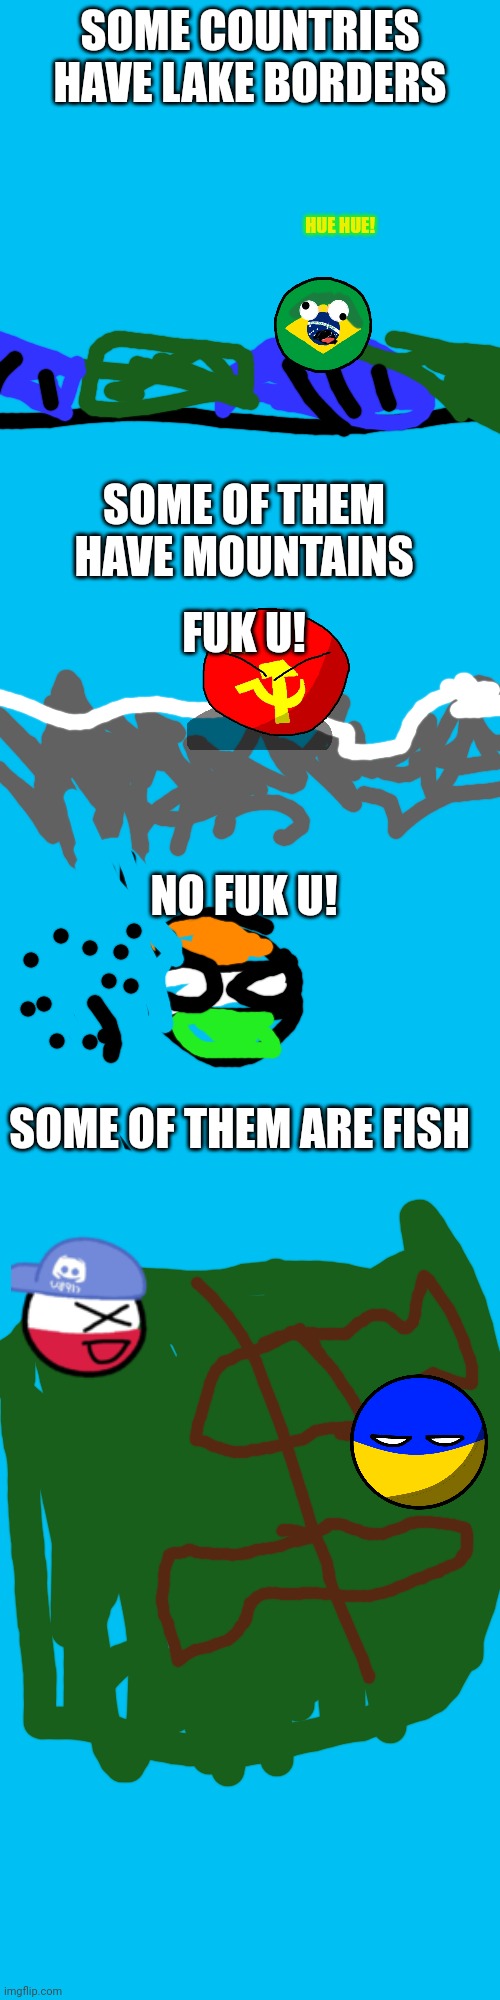 Borders portrayed by countryballs |  SOME COUNTRIES HAVE LAKE BORDERS; HUE HUE! SOME OF THEM HAVE MOUNTAINS; FUK U! NO FUK U! SOME OF THEM ARE FISH | image tagged in memes,blank transparent square | made w/ Imgflip meme maker